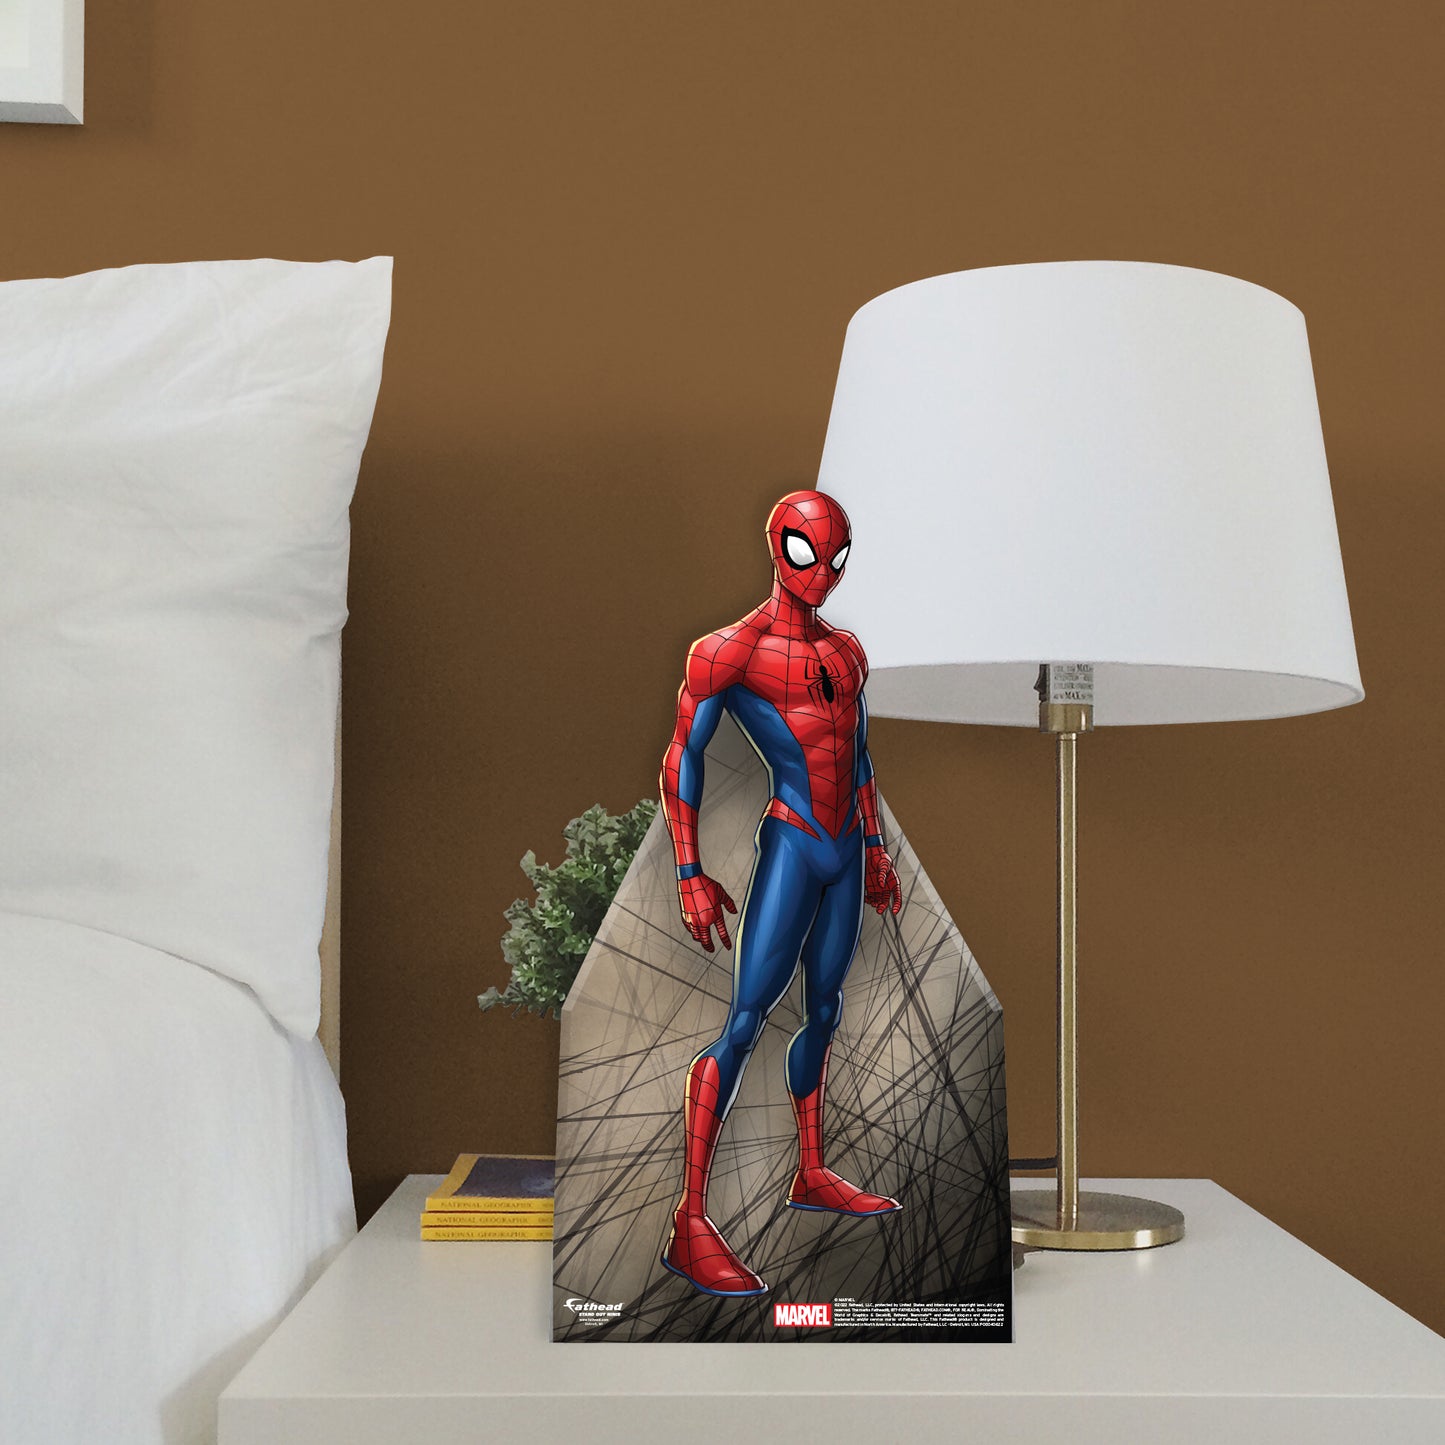 Spider-Man: Spider-Man Mini   Cardstock Cutout  - Officially Licensed Marvel    Stand Out